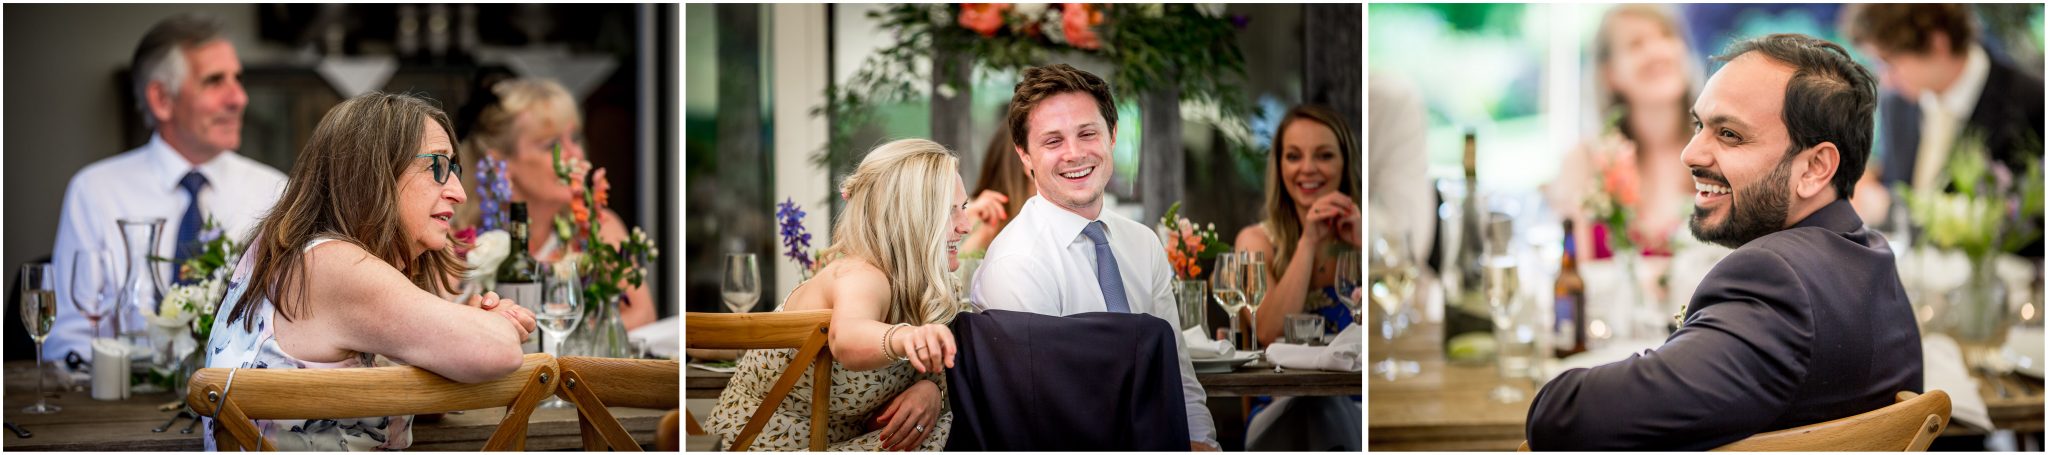 Wedding guests laughing during the speeches